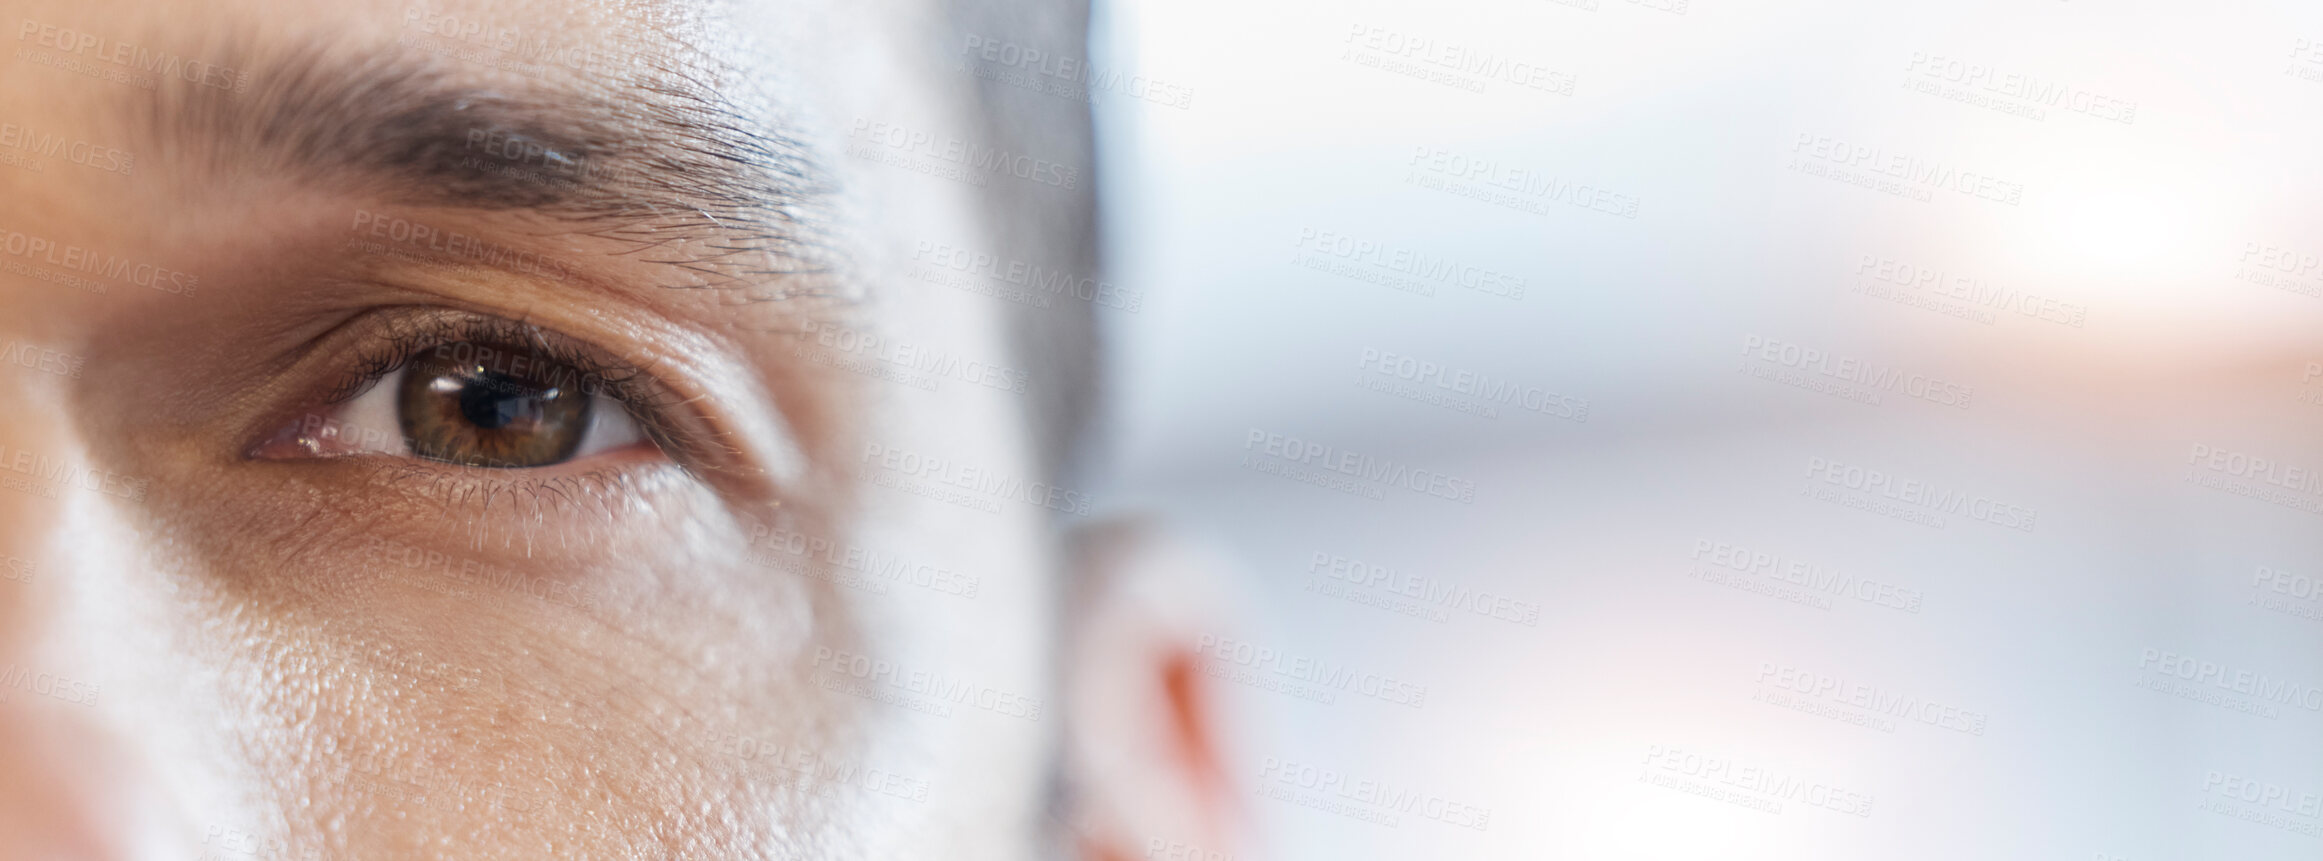 Buy stock photo Closeup eye, portrait and a man with mockup for vision, healthcare and banner of contact lens. Focus, space and face of an optometry patient advertising health and wellness of eyesight with bokeh